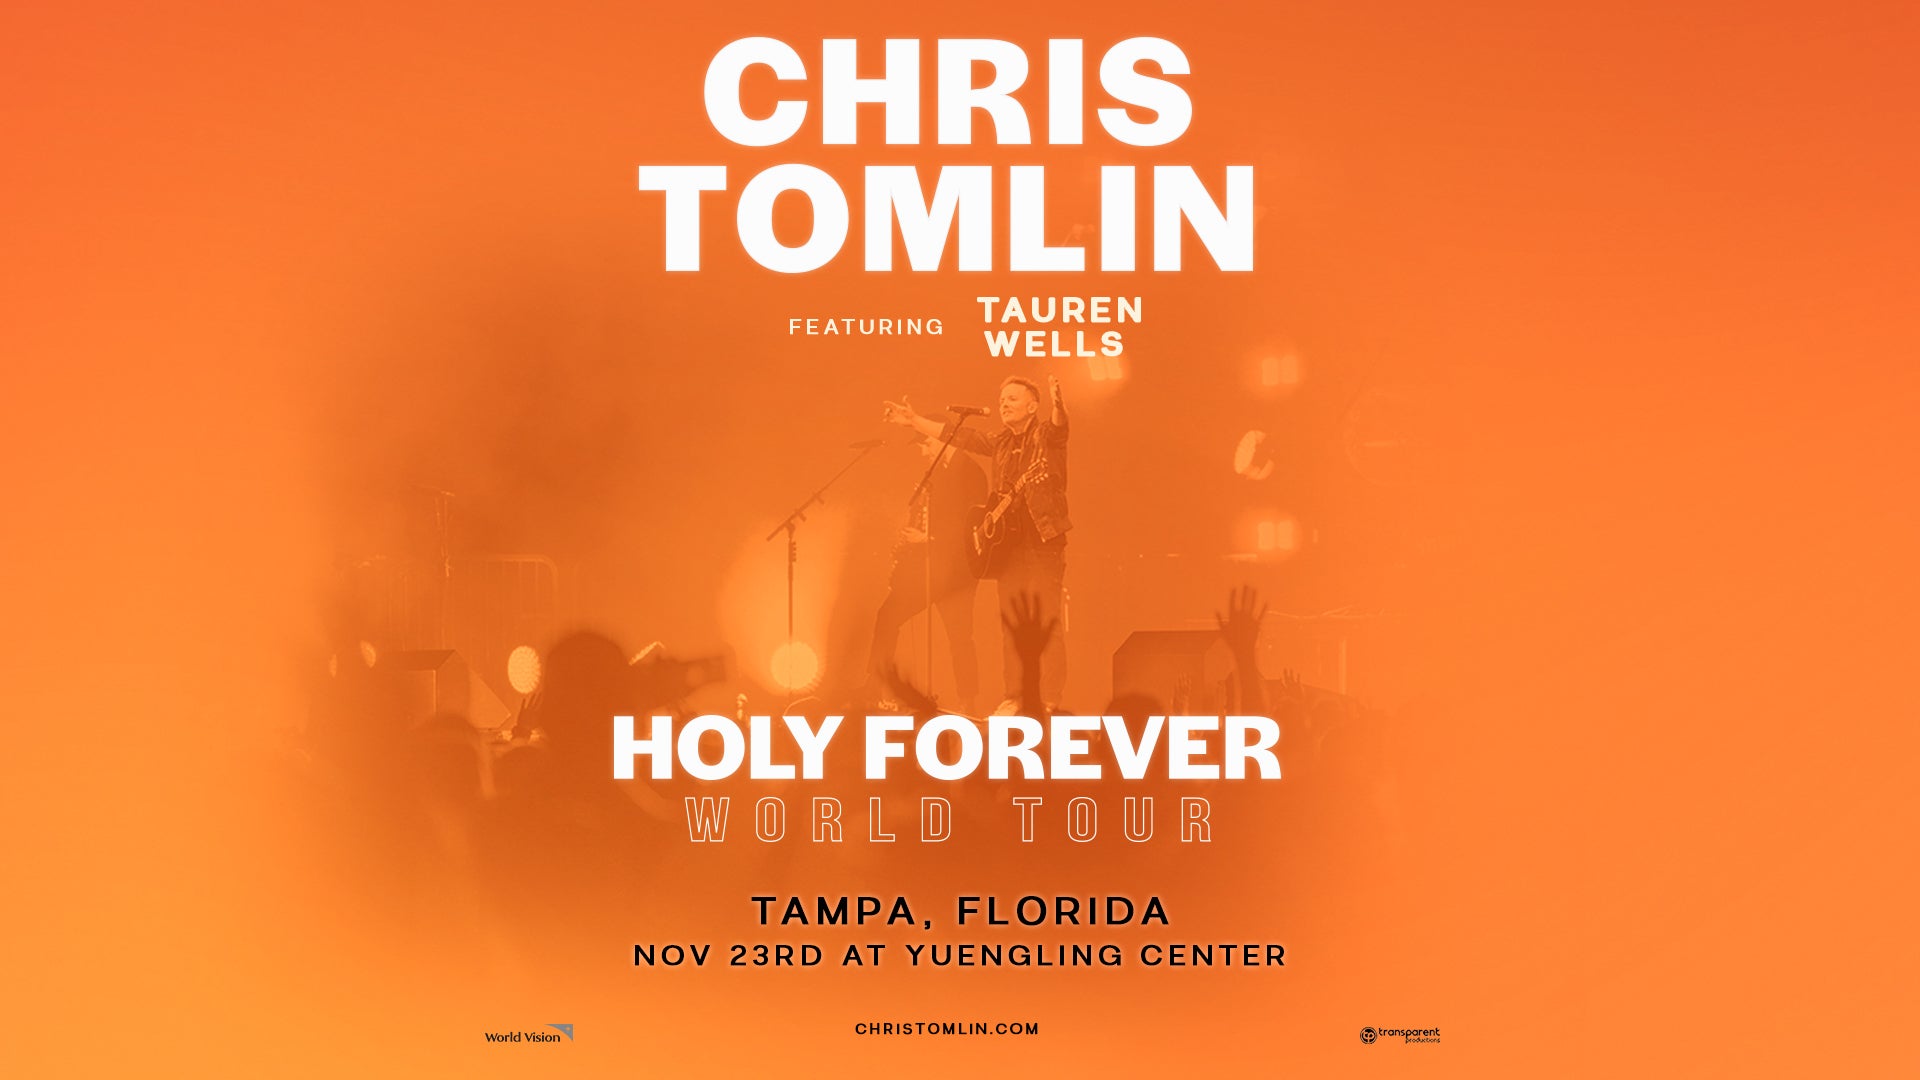 Chris Tomlin_Holy Forever Fall Tour_Local_1920x1080_Tampa.jpg